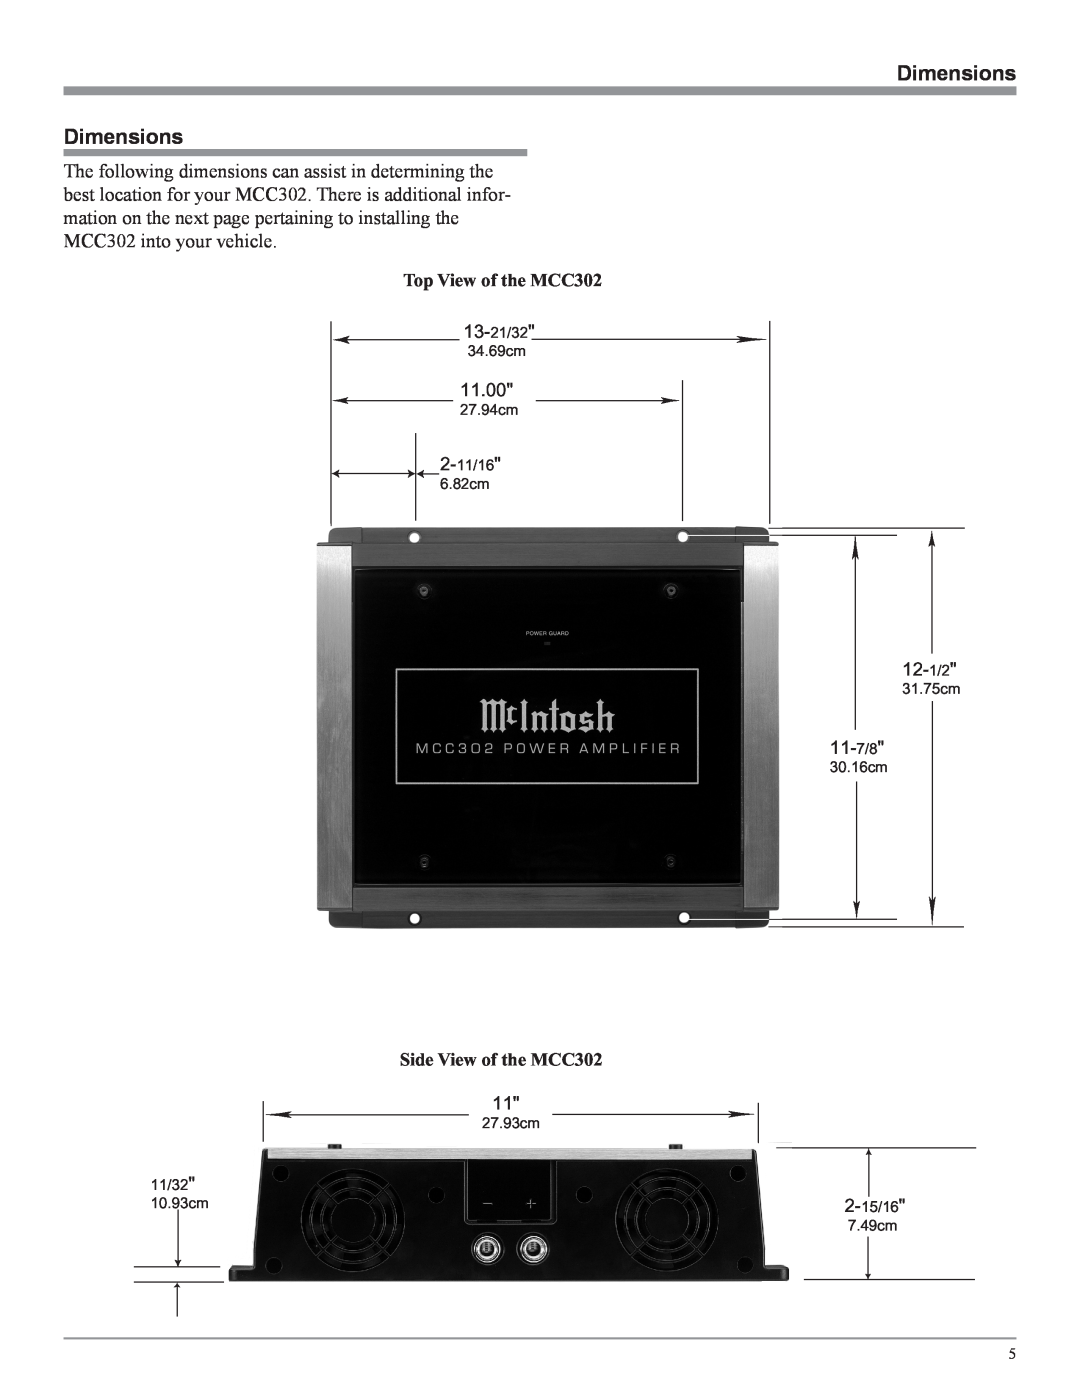 McIntosh MCC302M Dimensions Dimensions, Top View of the MCC302, 11.00, 12-1/2, 11-7/8, Side View of the MCC302, 31.75cm 